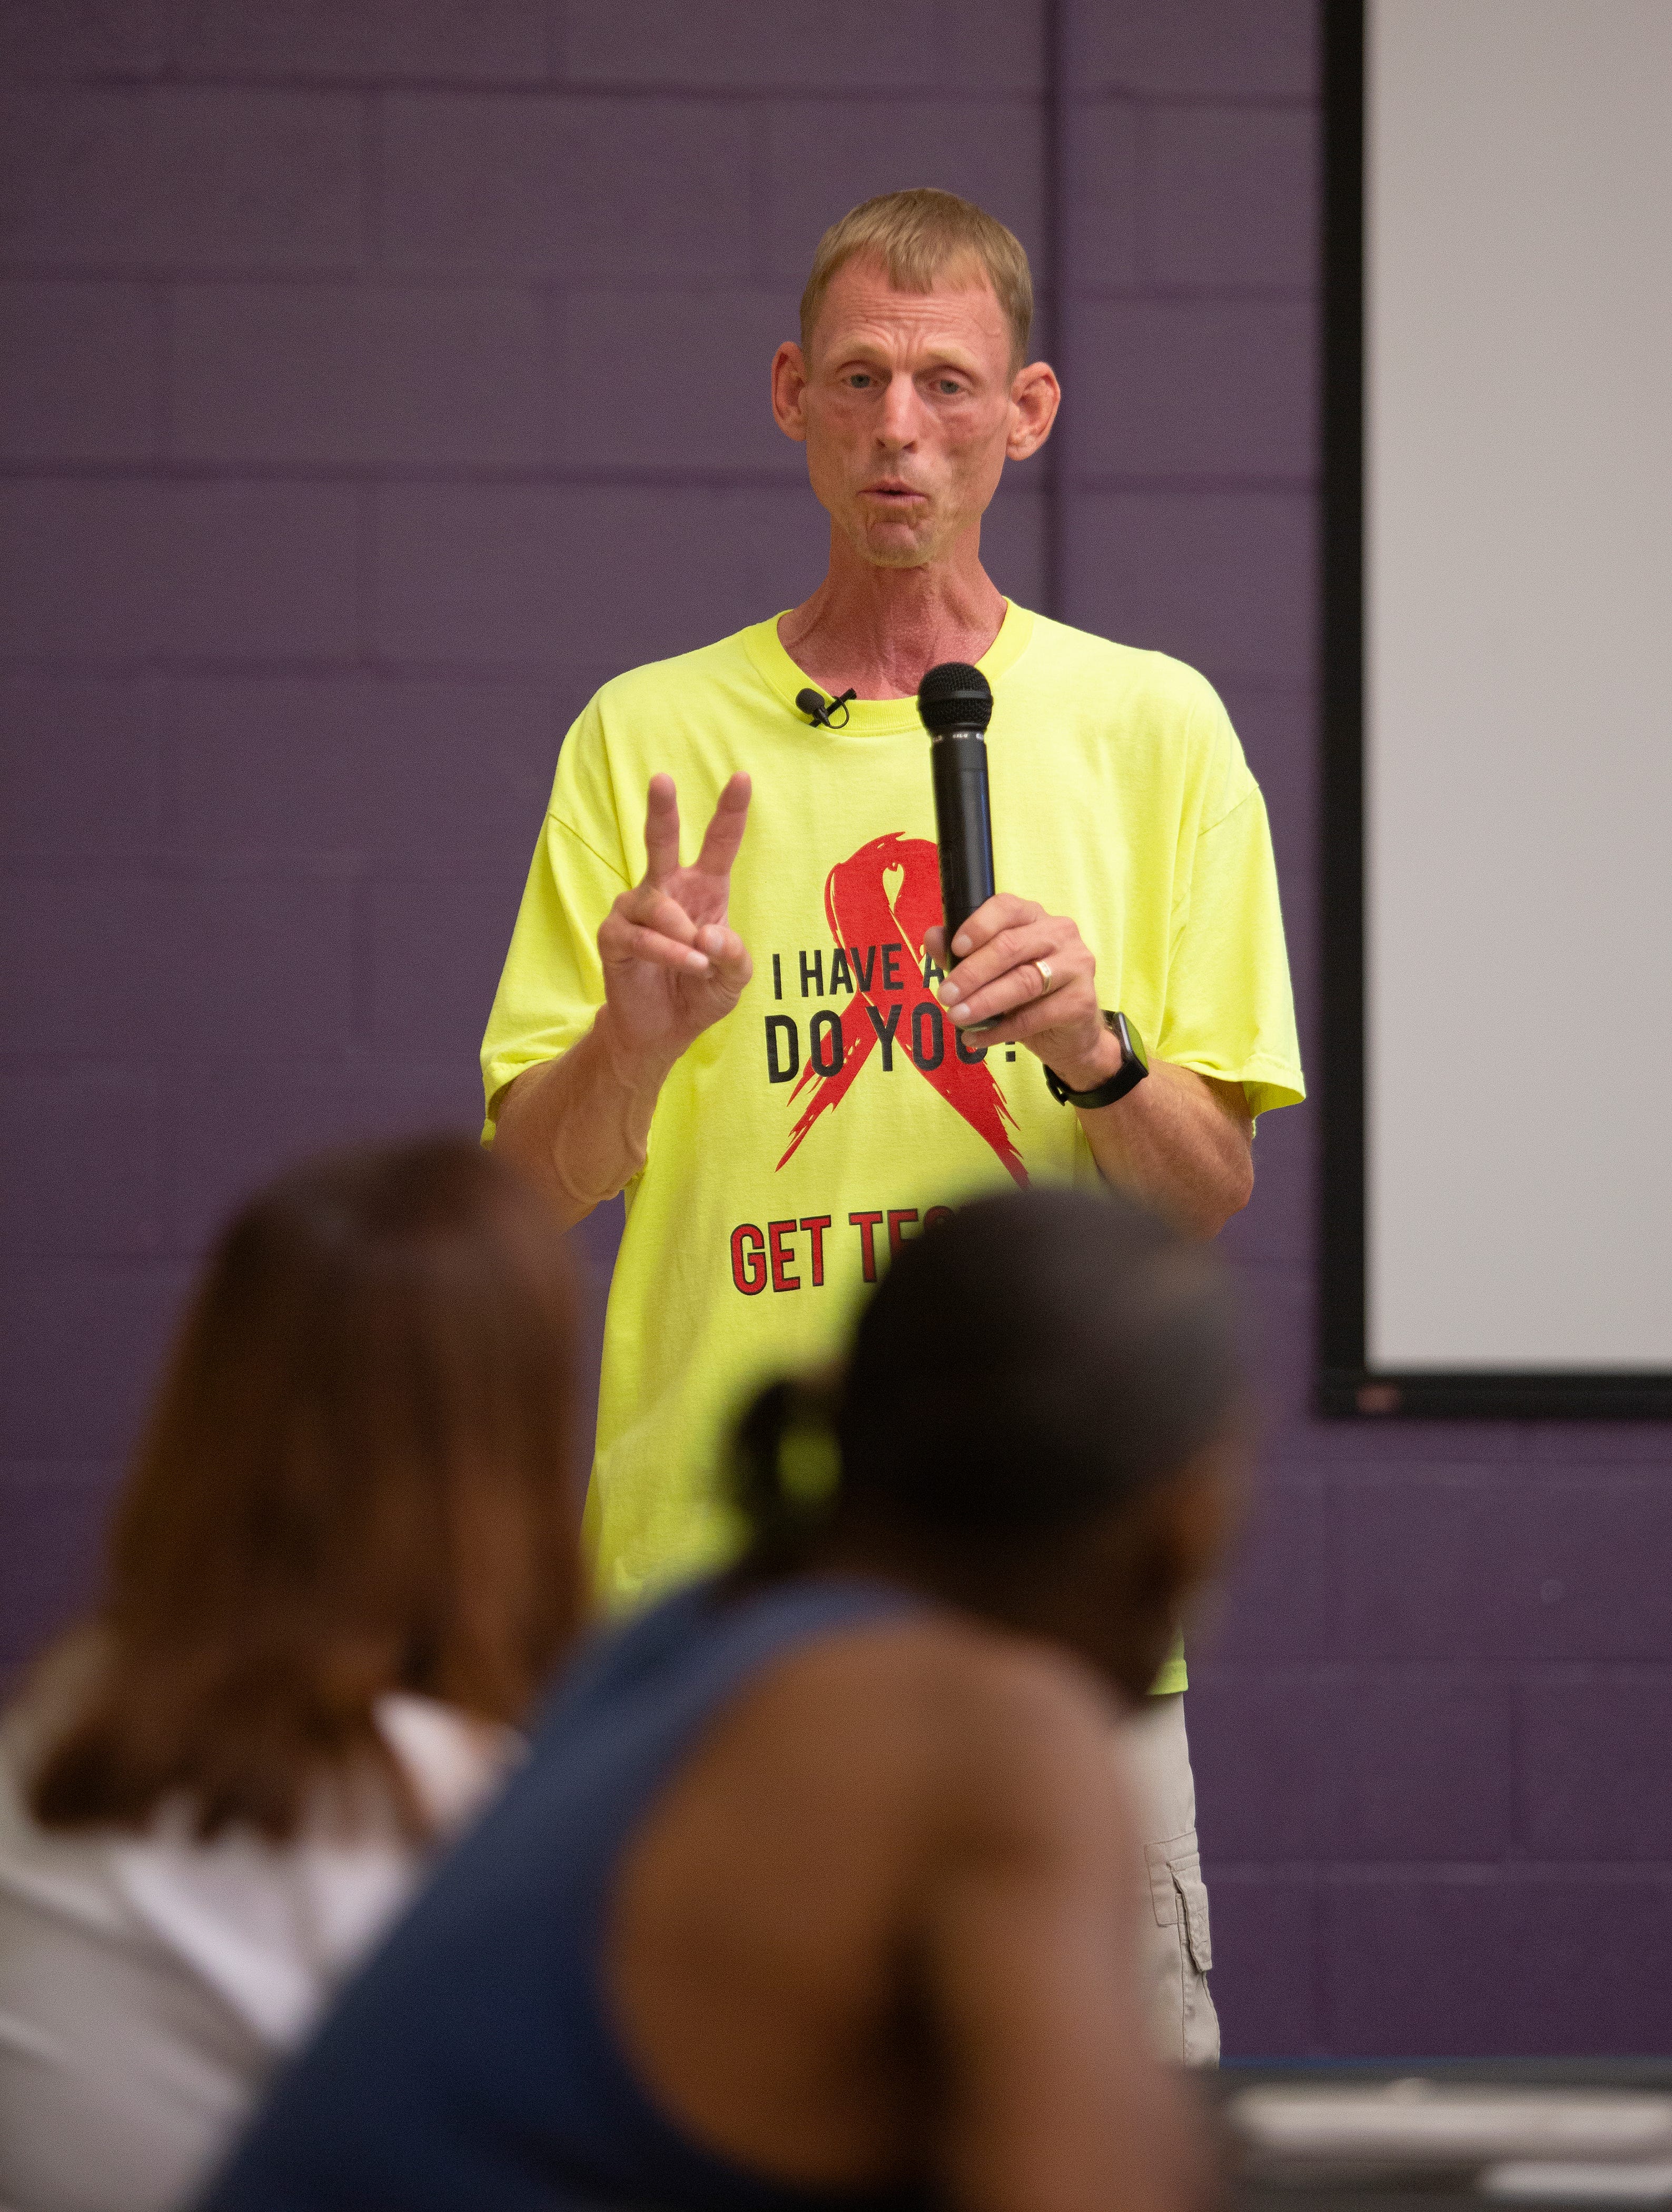 Dave Baker gives information on using condoms to greatly reduce chances of getting or spreading Aids during one of his events at the Milo Grogan Community Center. Baker is passionate about spreading the word on HIV/Aids causes and prevention in Black neighborhoods.